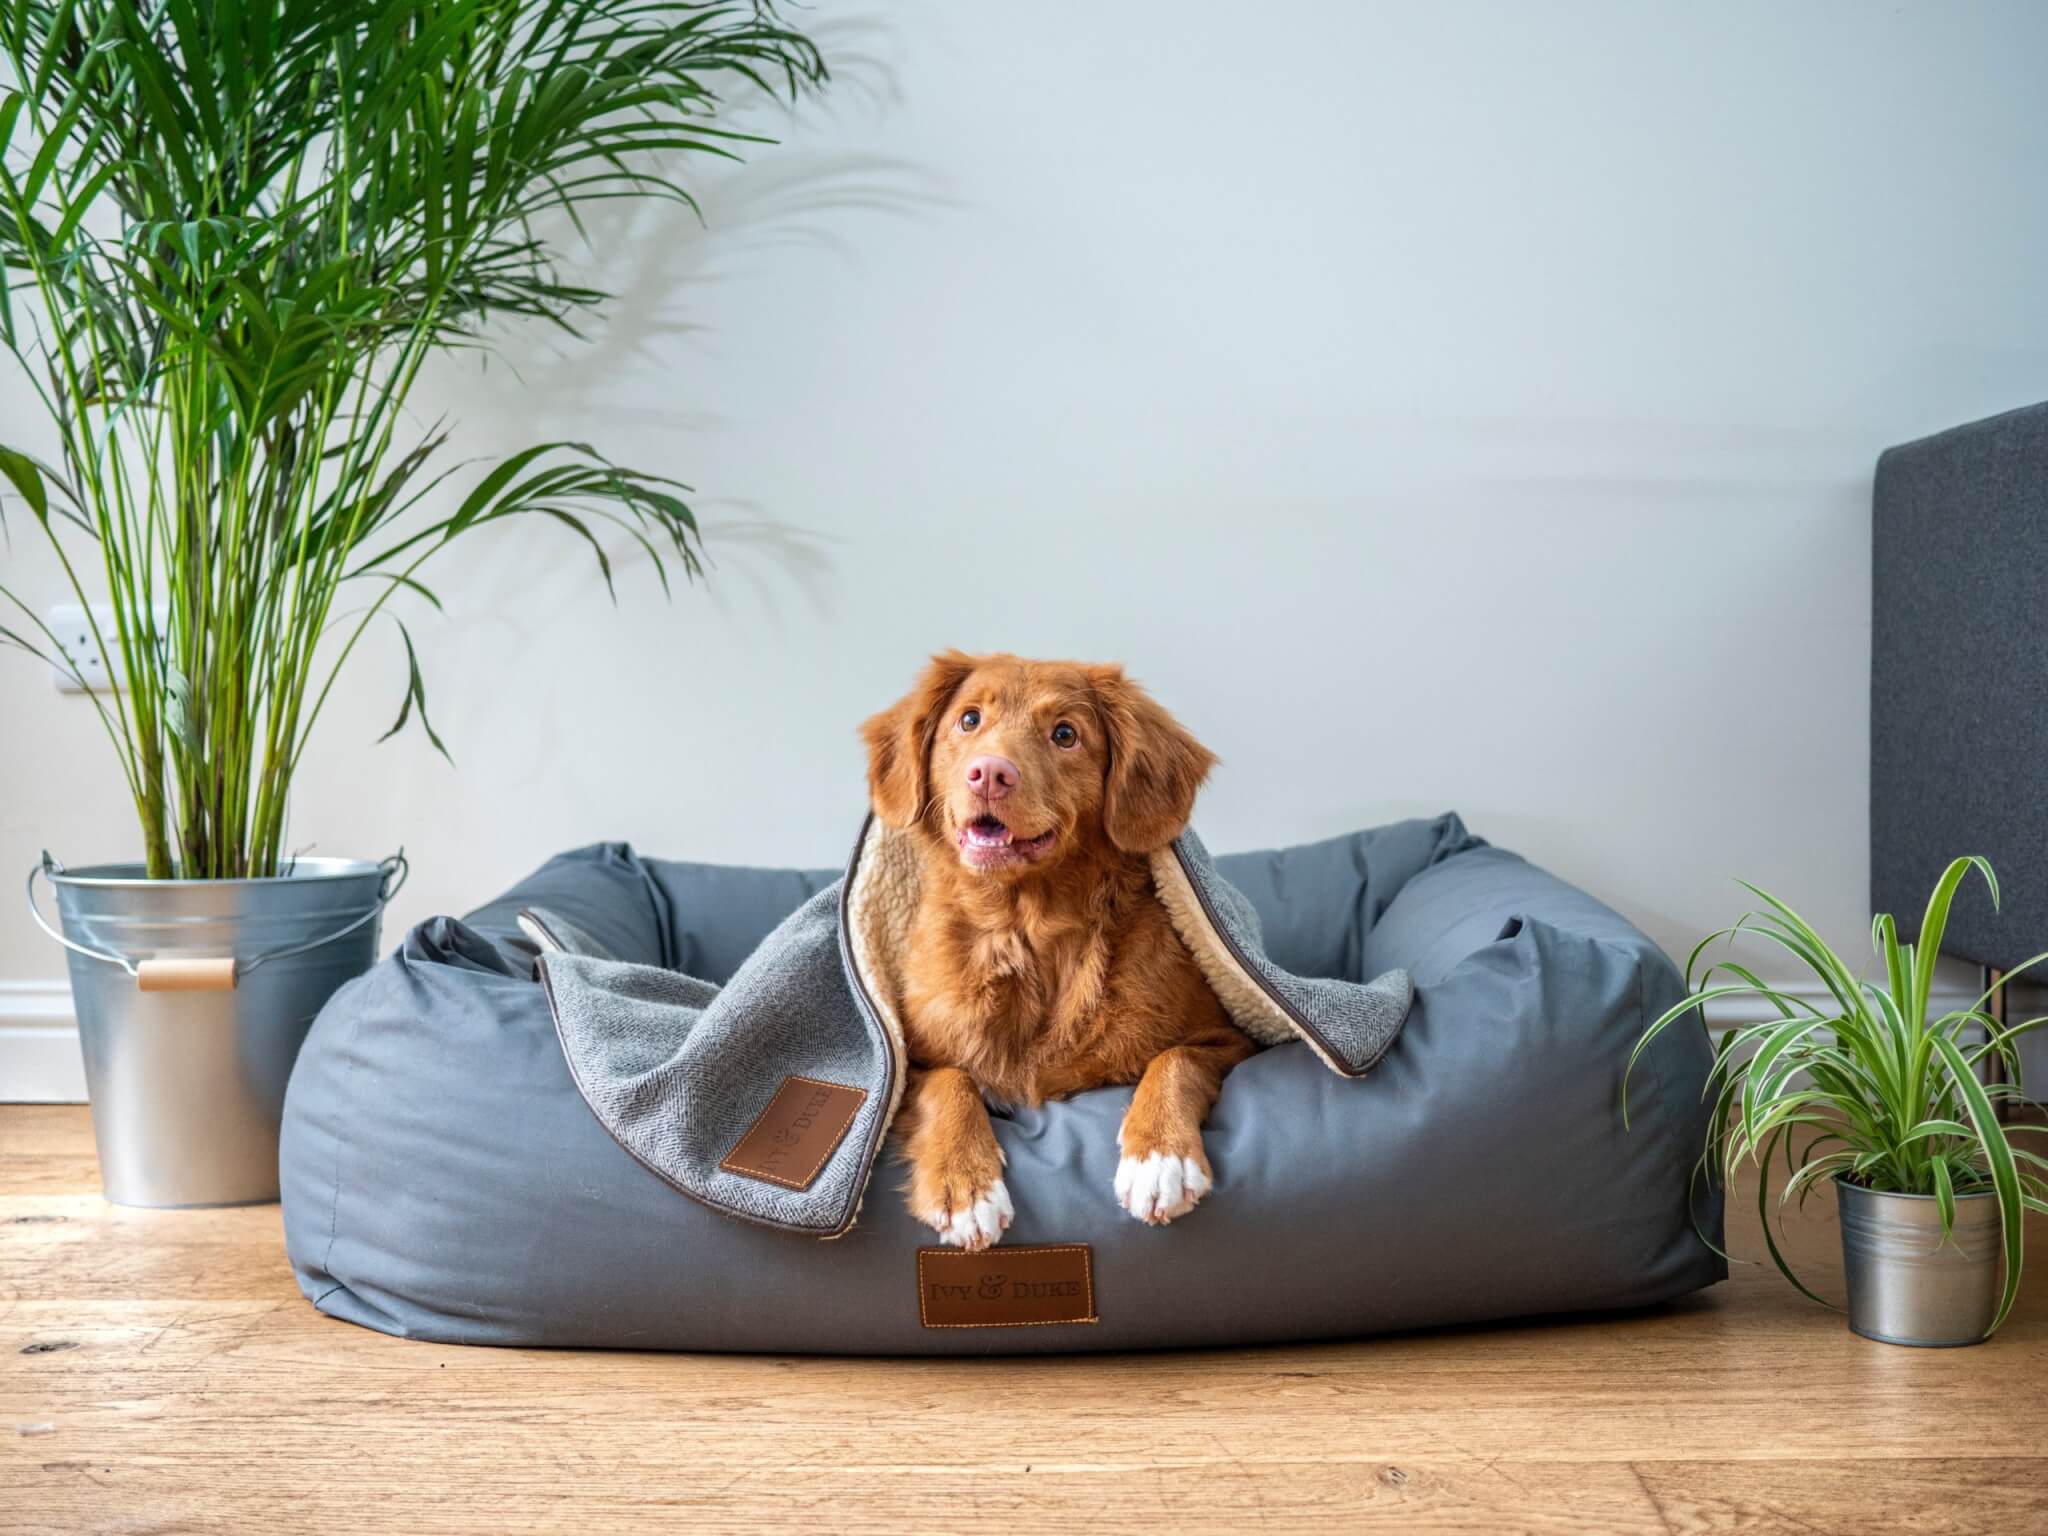 Best Dog Beds For Your Pup In 2023: Here Are The Top 5 Most Recommended By Pet Experts - Study Finds